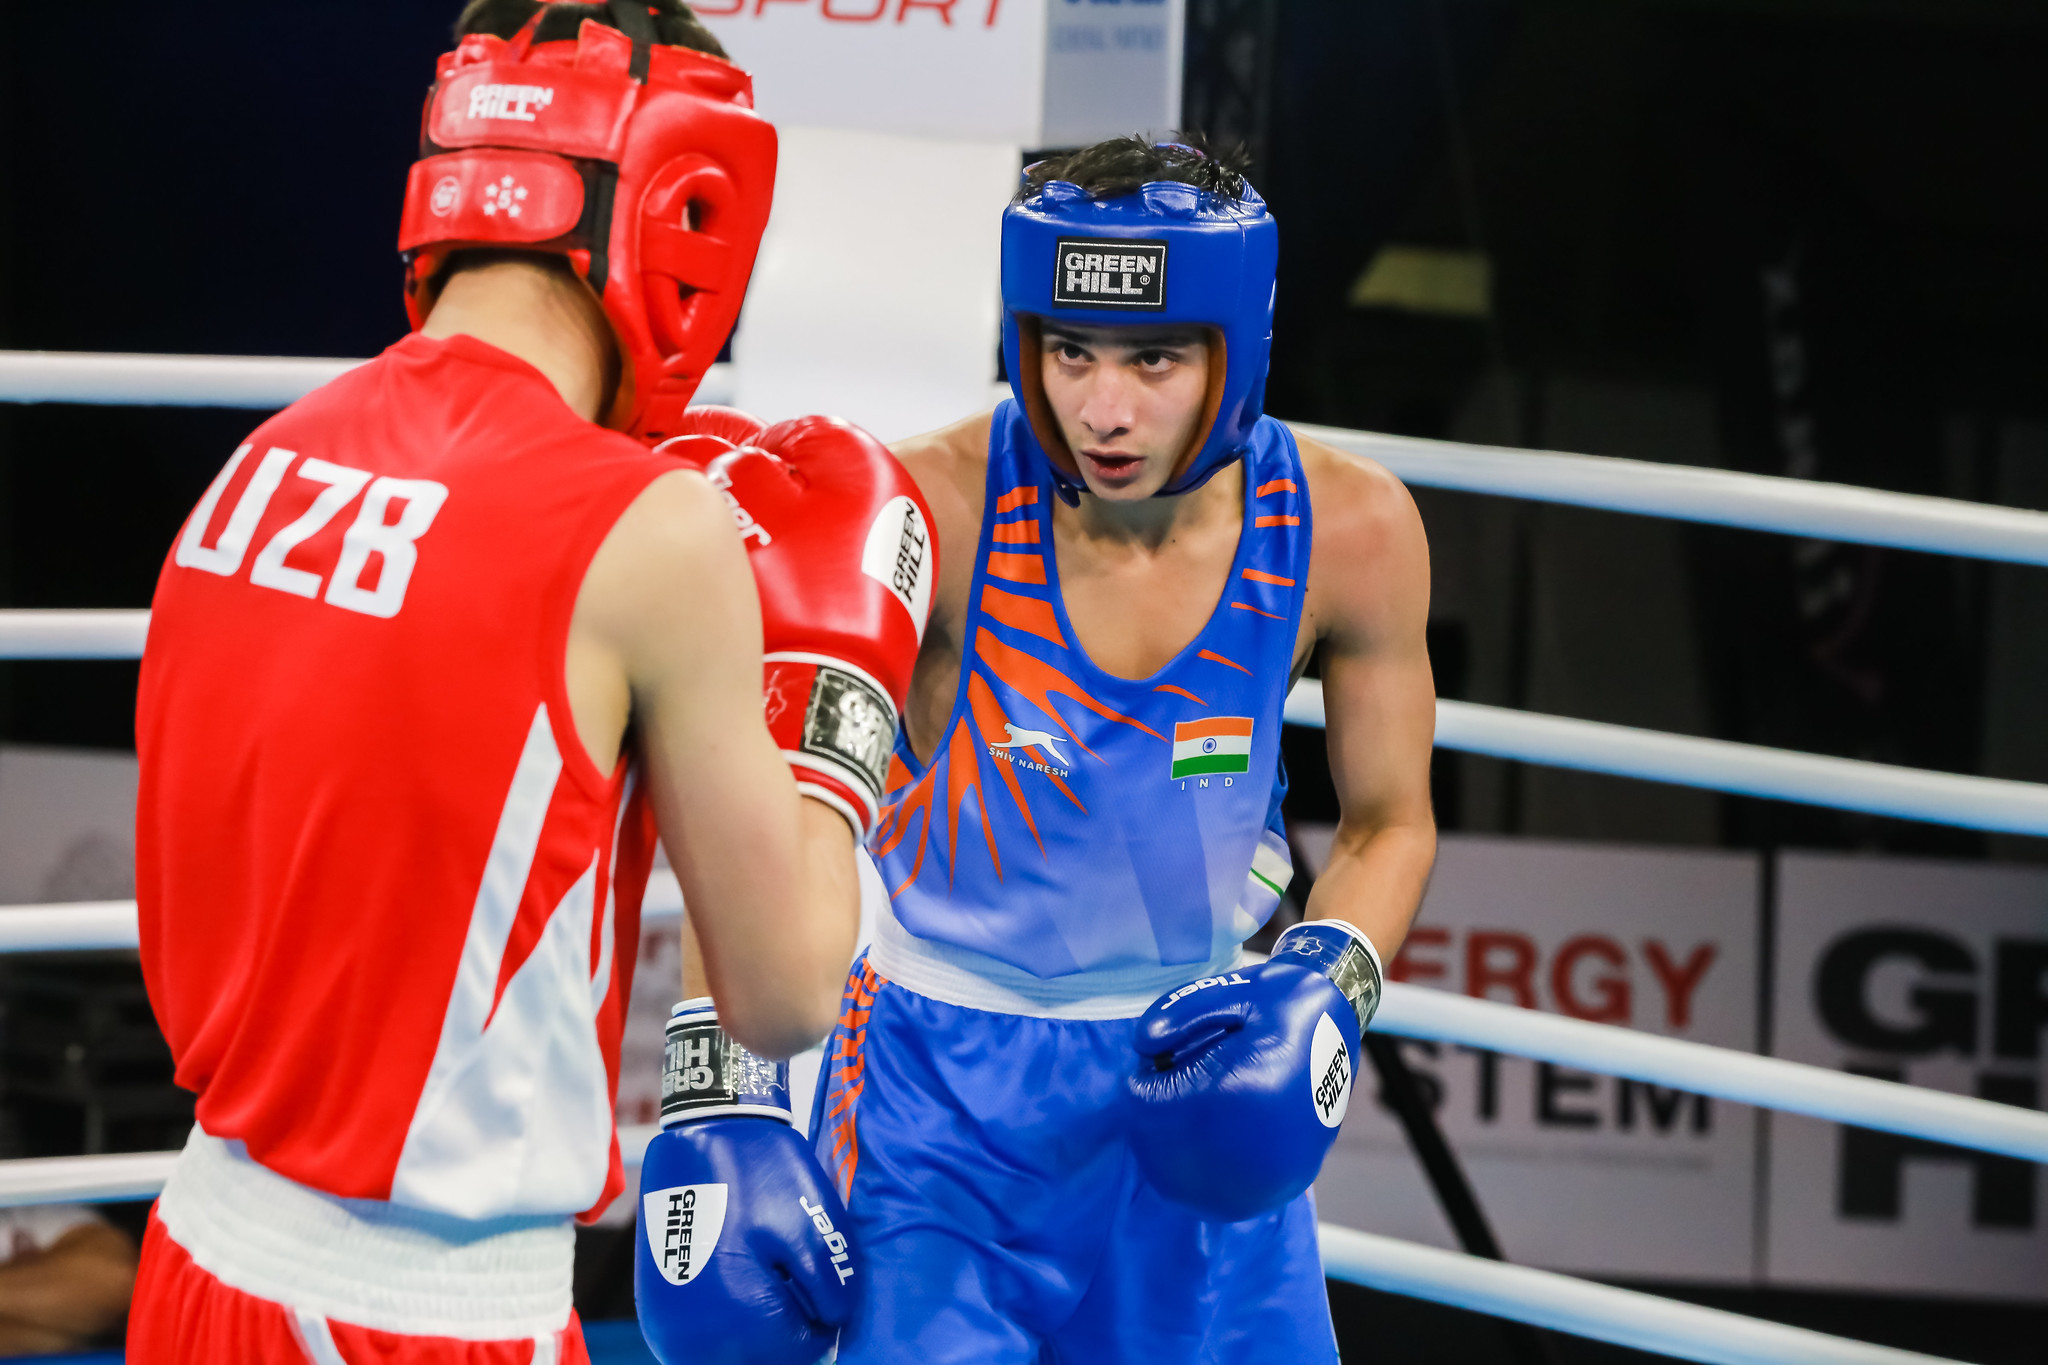 Sachin, in blue, joined the Indian medal rush in the men's 56kg bantamweight category ©AIBA